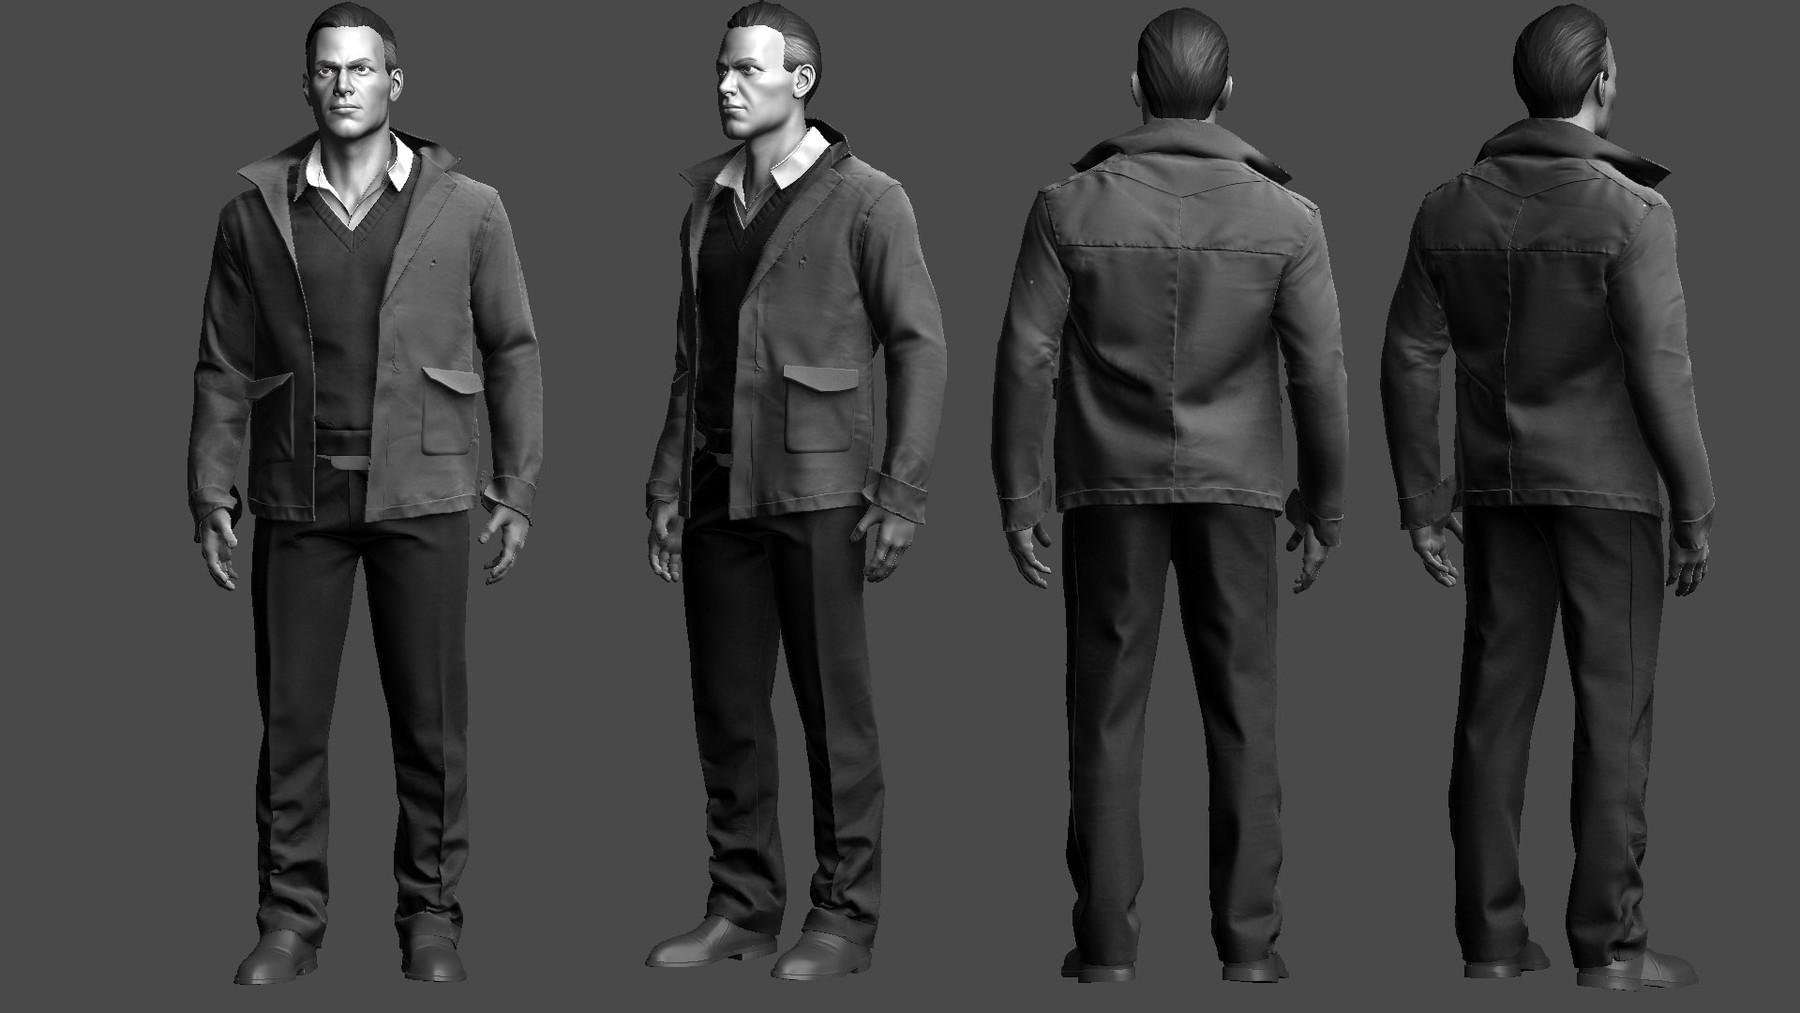 ArtStation - Realistic Clothing for Game Characters | Tutorials